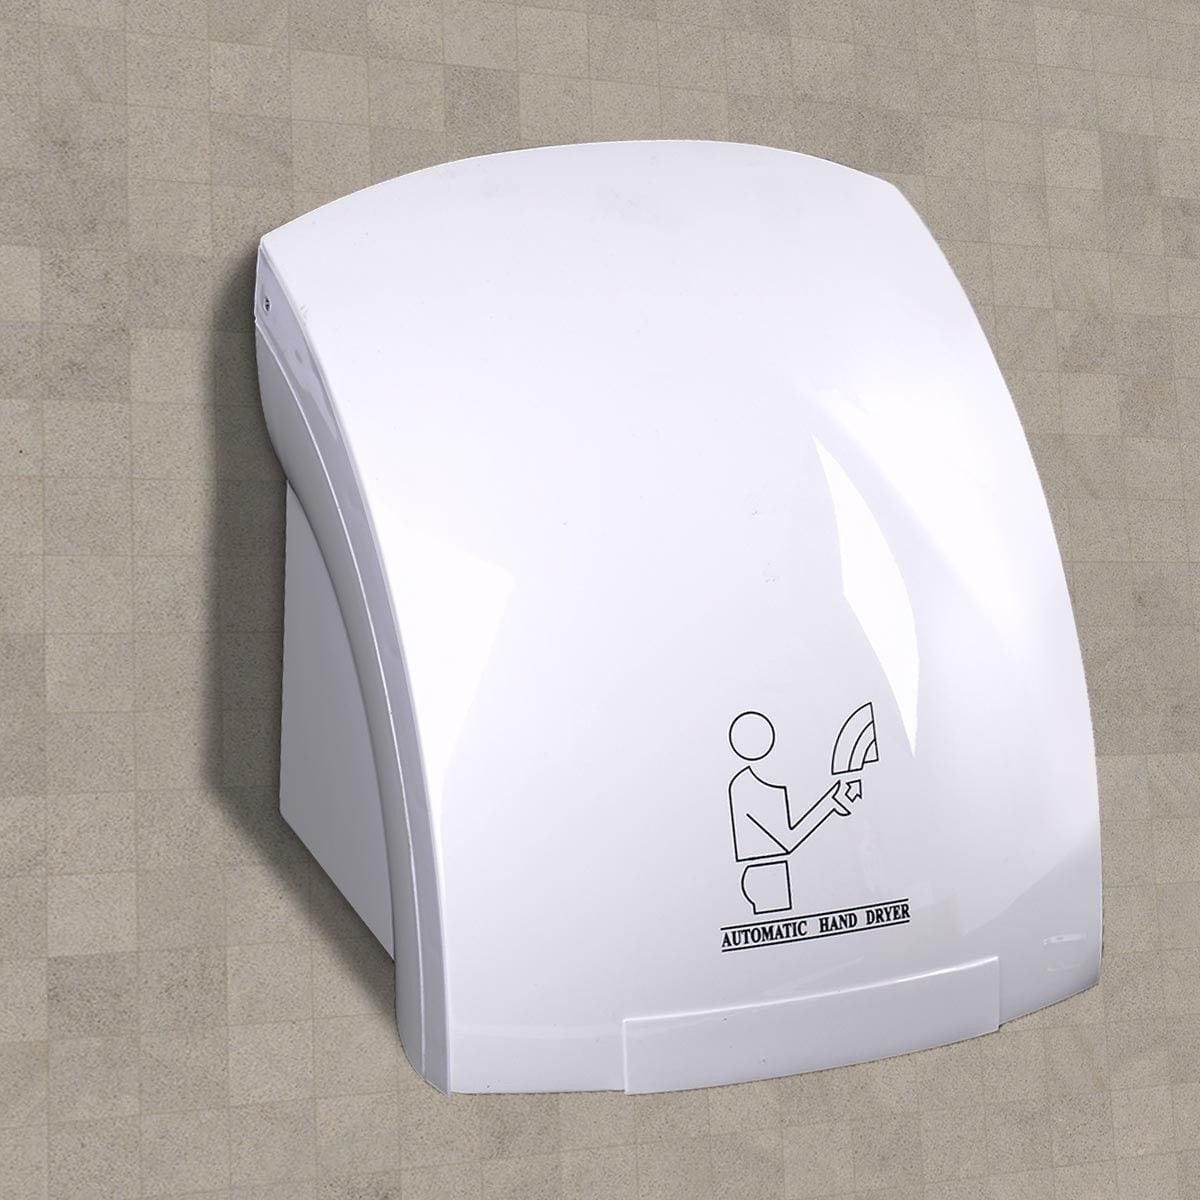 Wall Mounted Automatic Hot and Cold Hand Dryer | Supply Master | Accra, Ghana Janitorial & Cleaning Buy Tools hardware Building materials